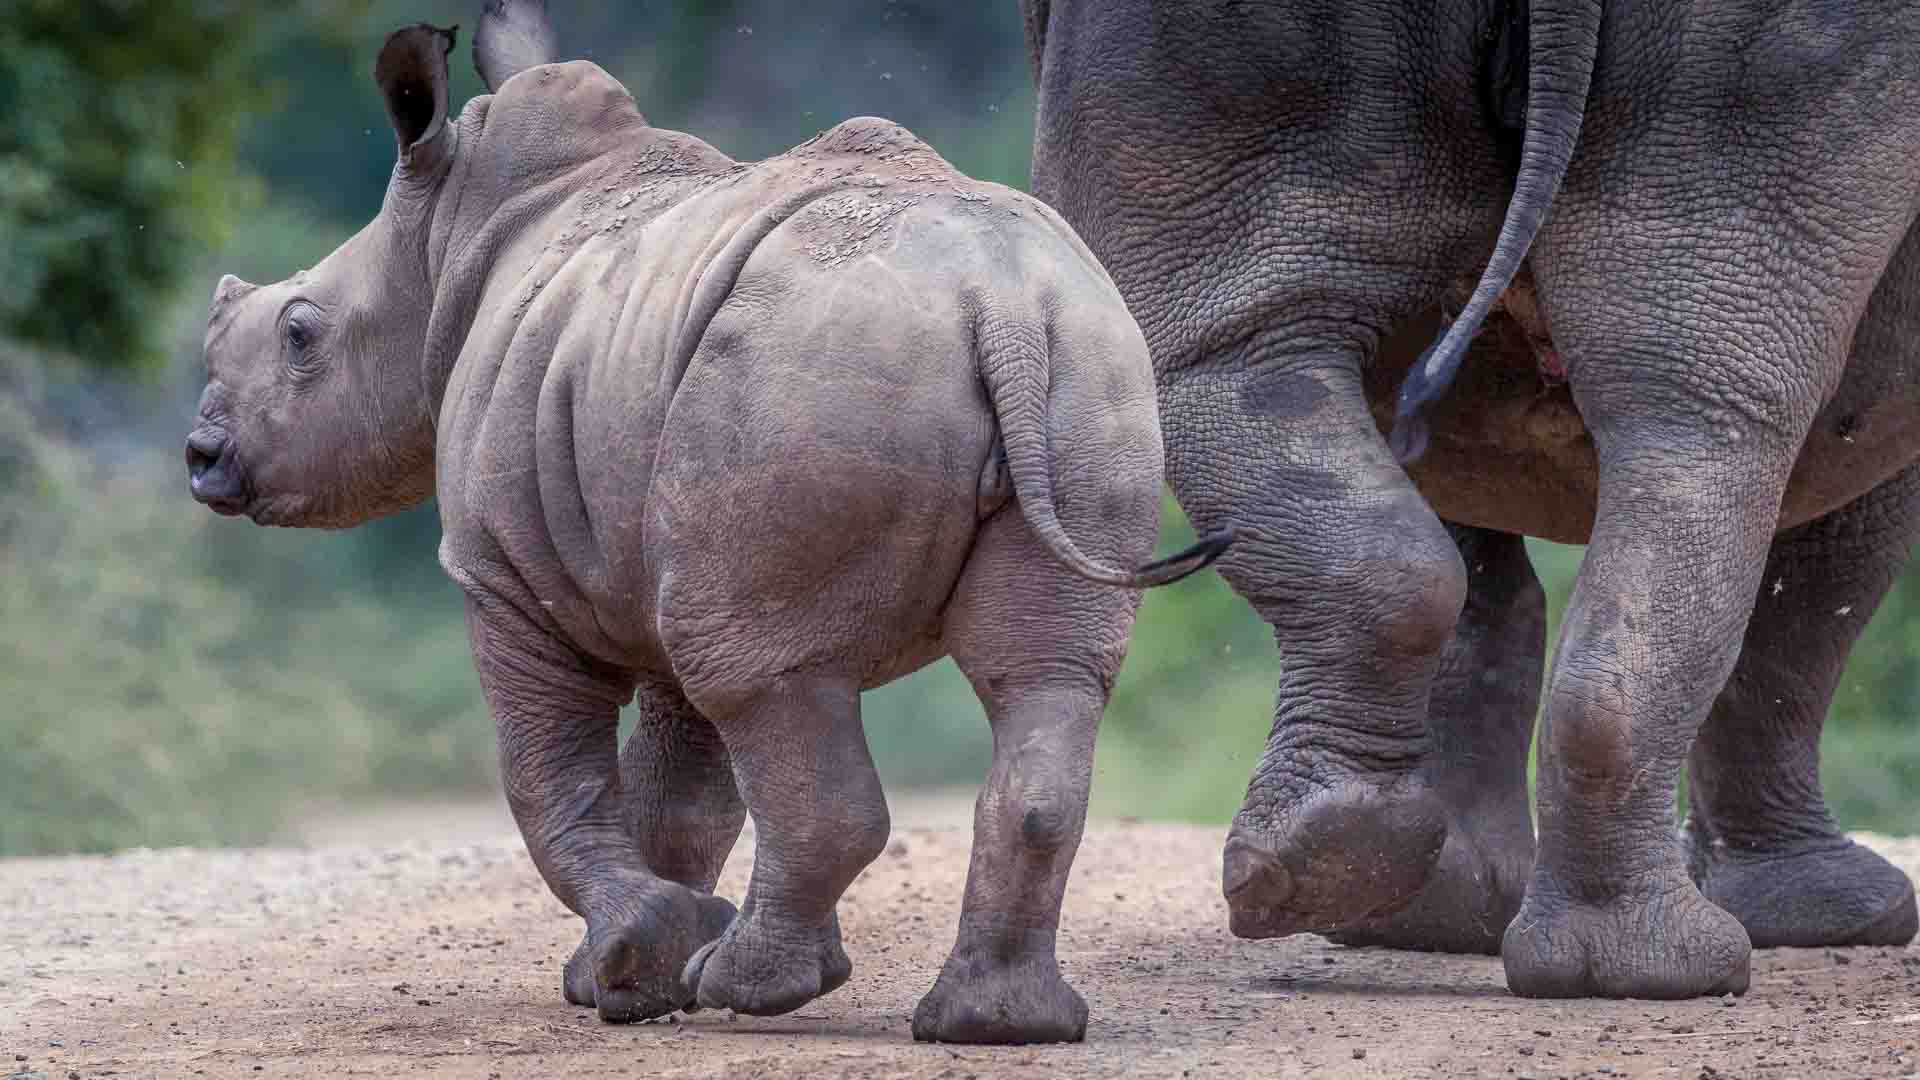 A rhino calf walking next to its mom in the Hluhluwe-iMfolozi Park.